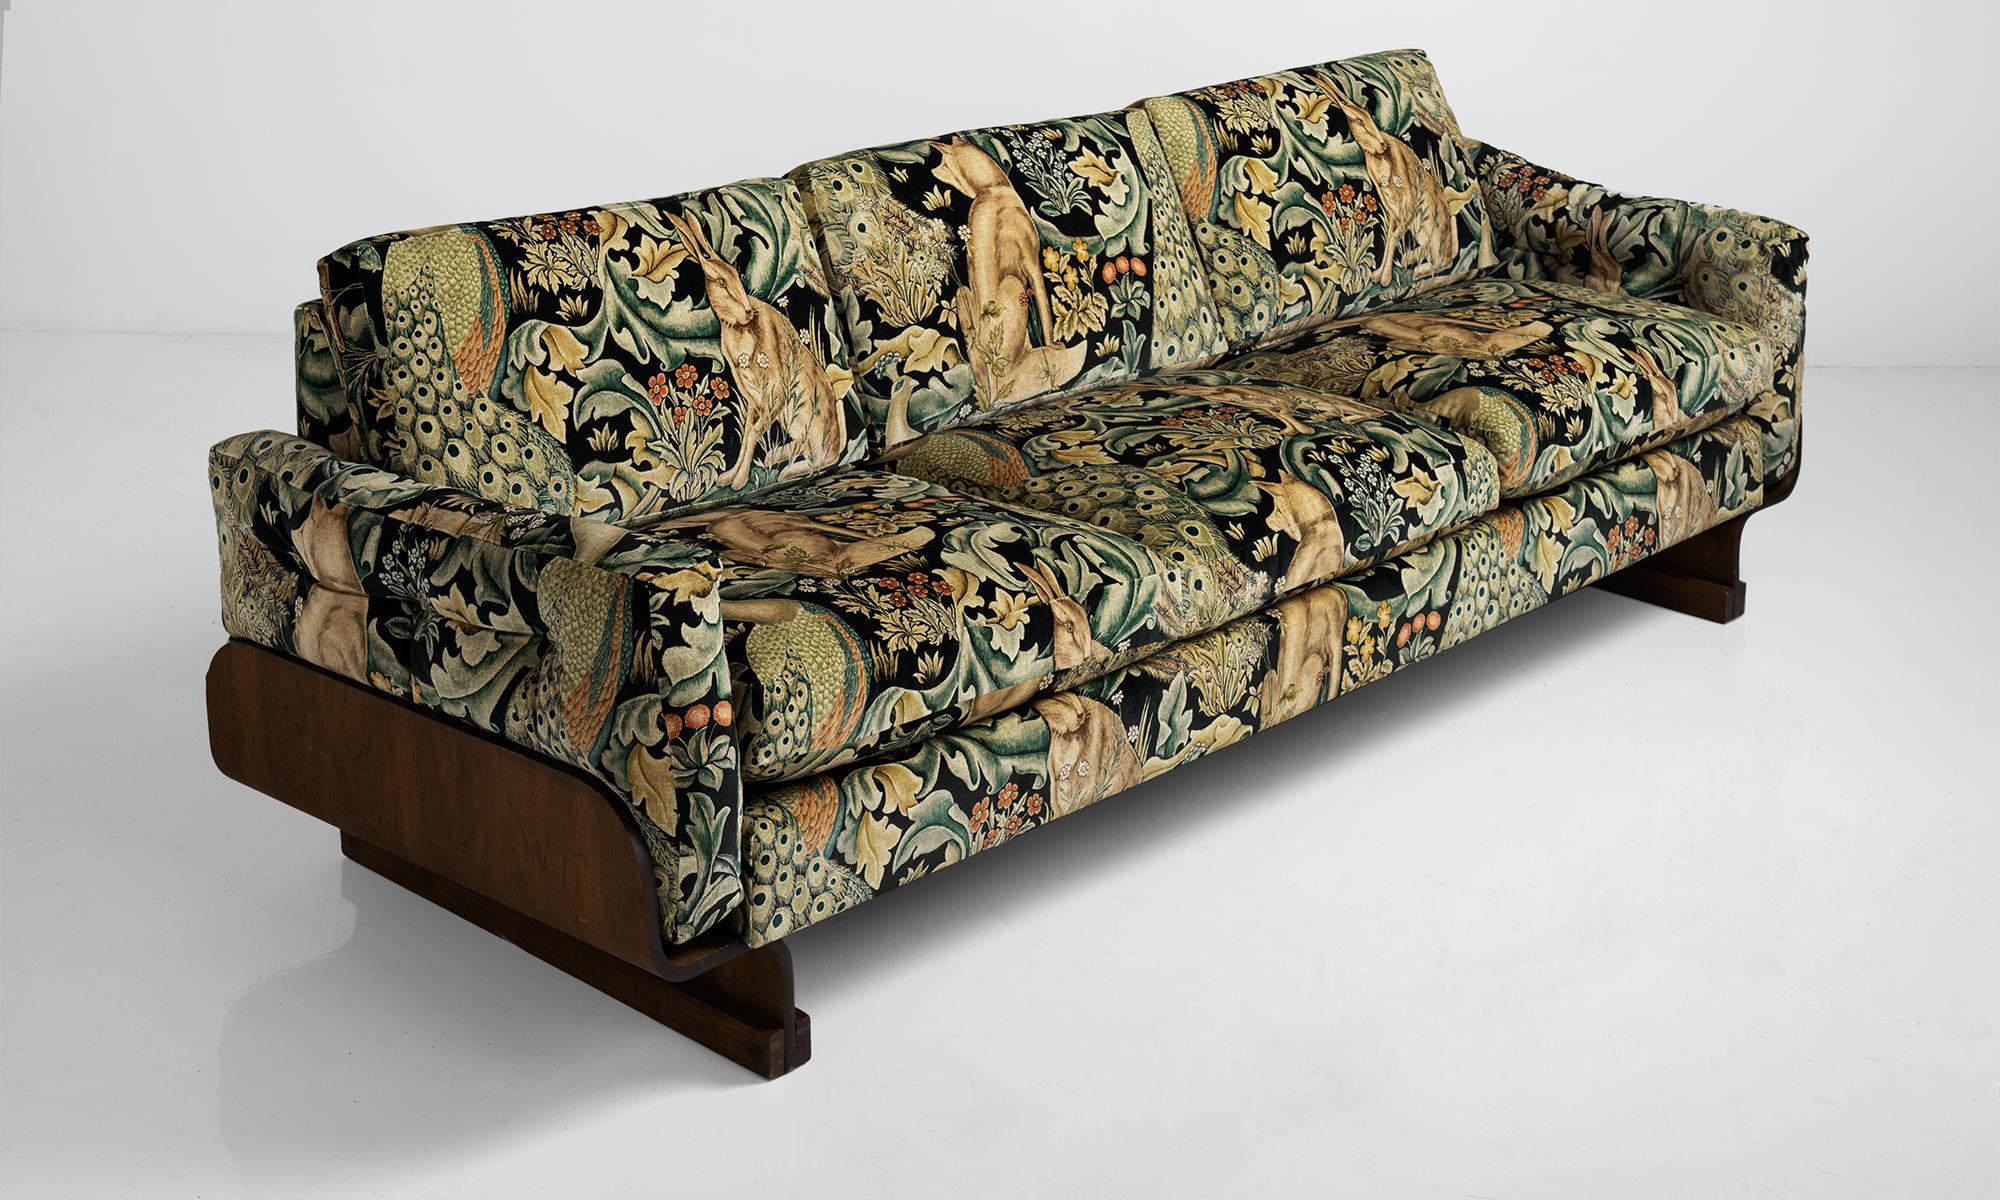 Bentwood modern sofa, America, circa 1960.

Low sofa, newly upholstered in William Morris fabric depicting a lively forest scene.